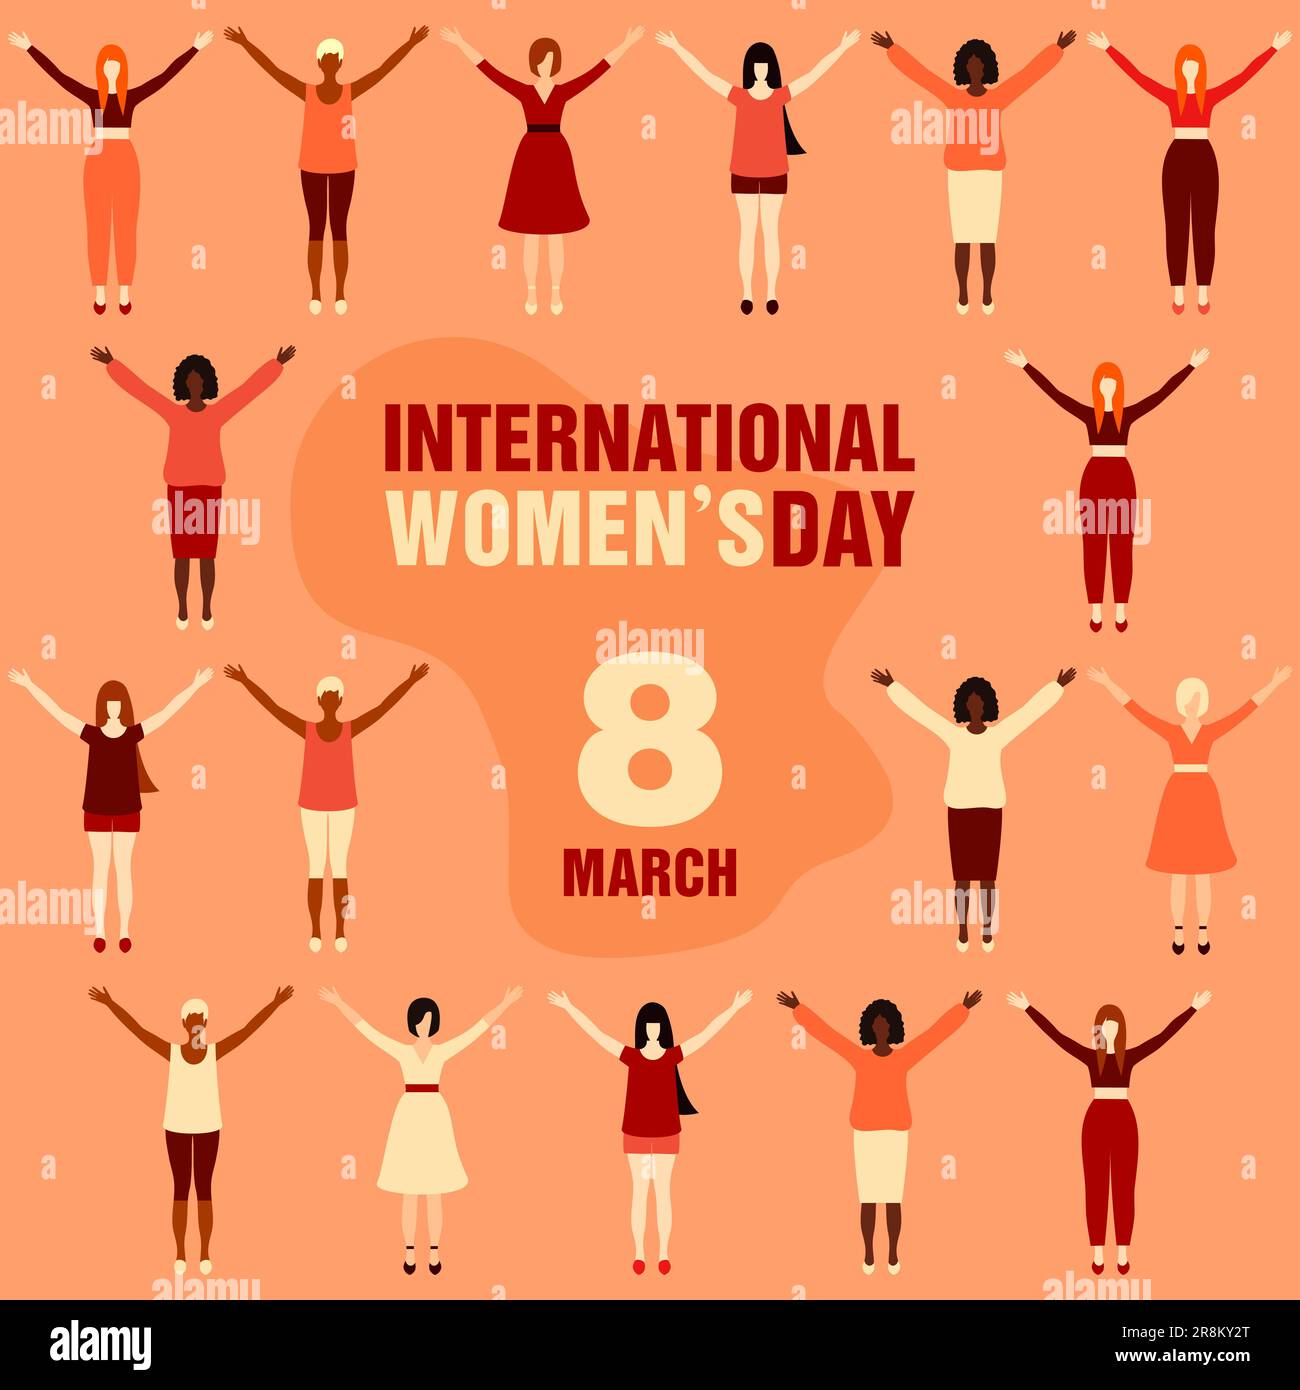 International Women's Day. Women of different ethnicities in full height with raised hands. Concept of female friendship, support and movement for wom Stock Vector